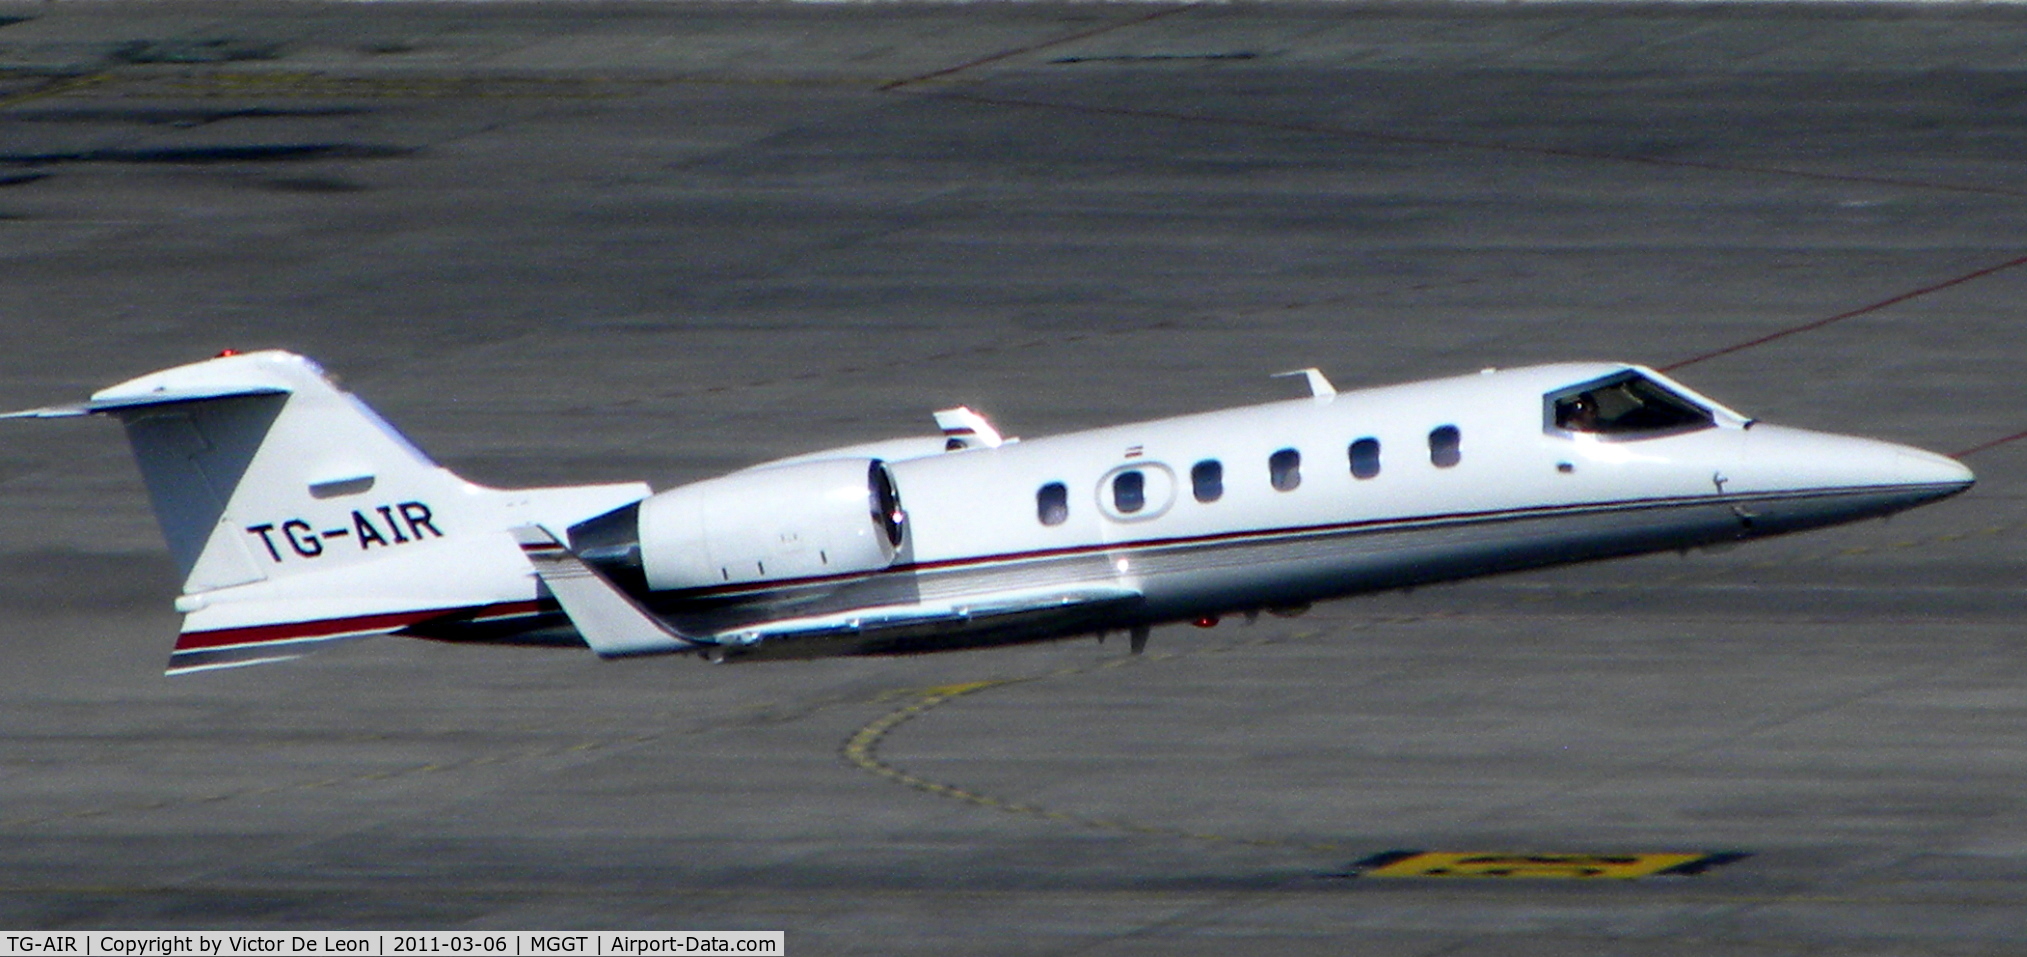 TG-AIR, 2010 Learjet 60 C/N 377, taking off from La Aurora int. airport at Guatemala city. this photo was taken from the roof top of the Crown Planza hotel.